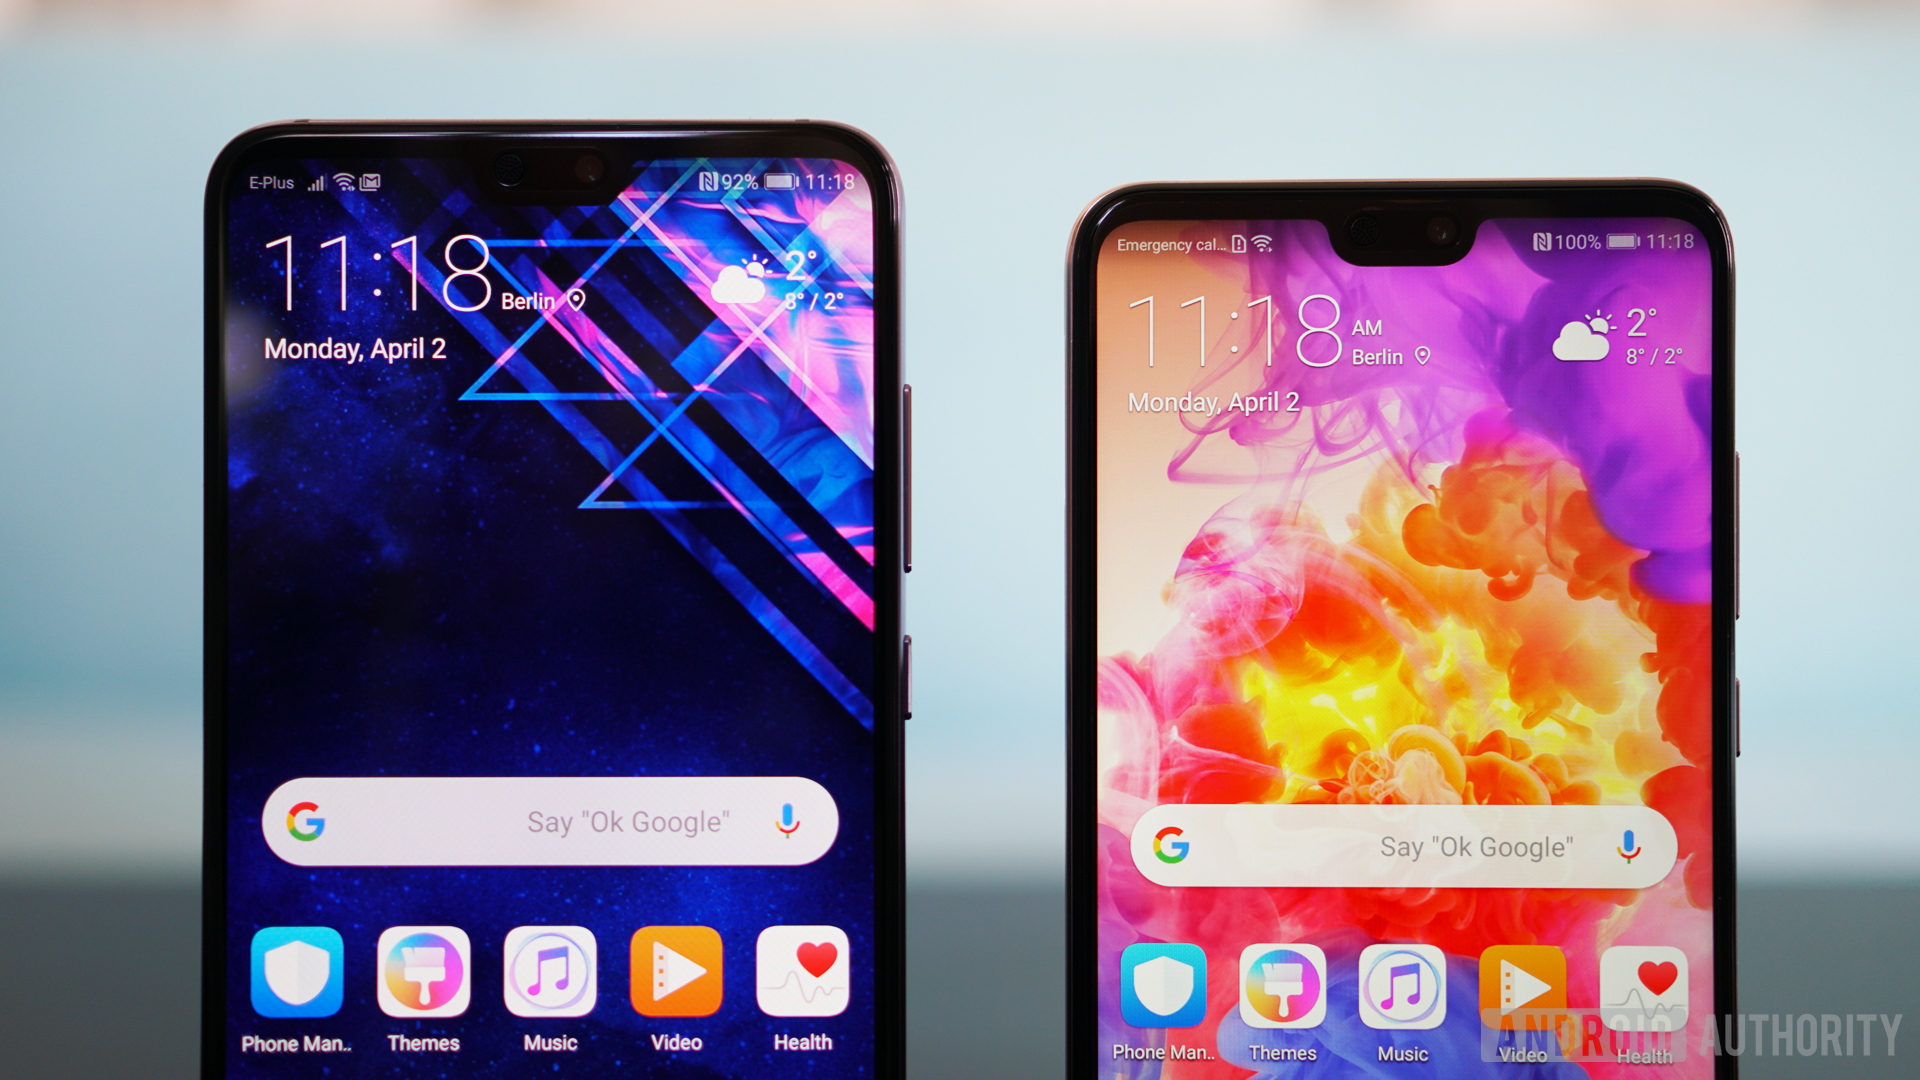 personalize your home screen, Huawei P20 Pro and Huawei P20 home screens